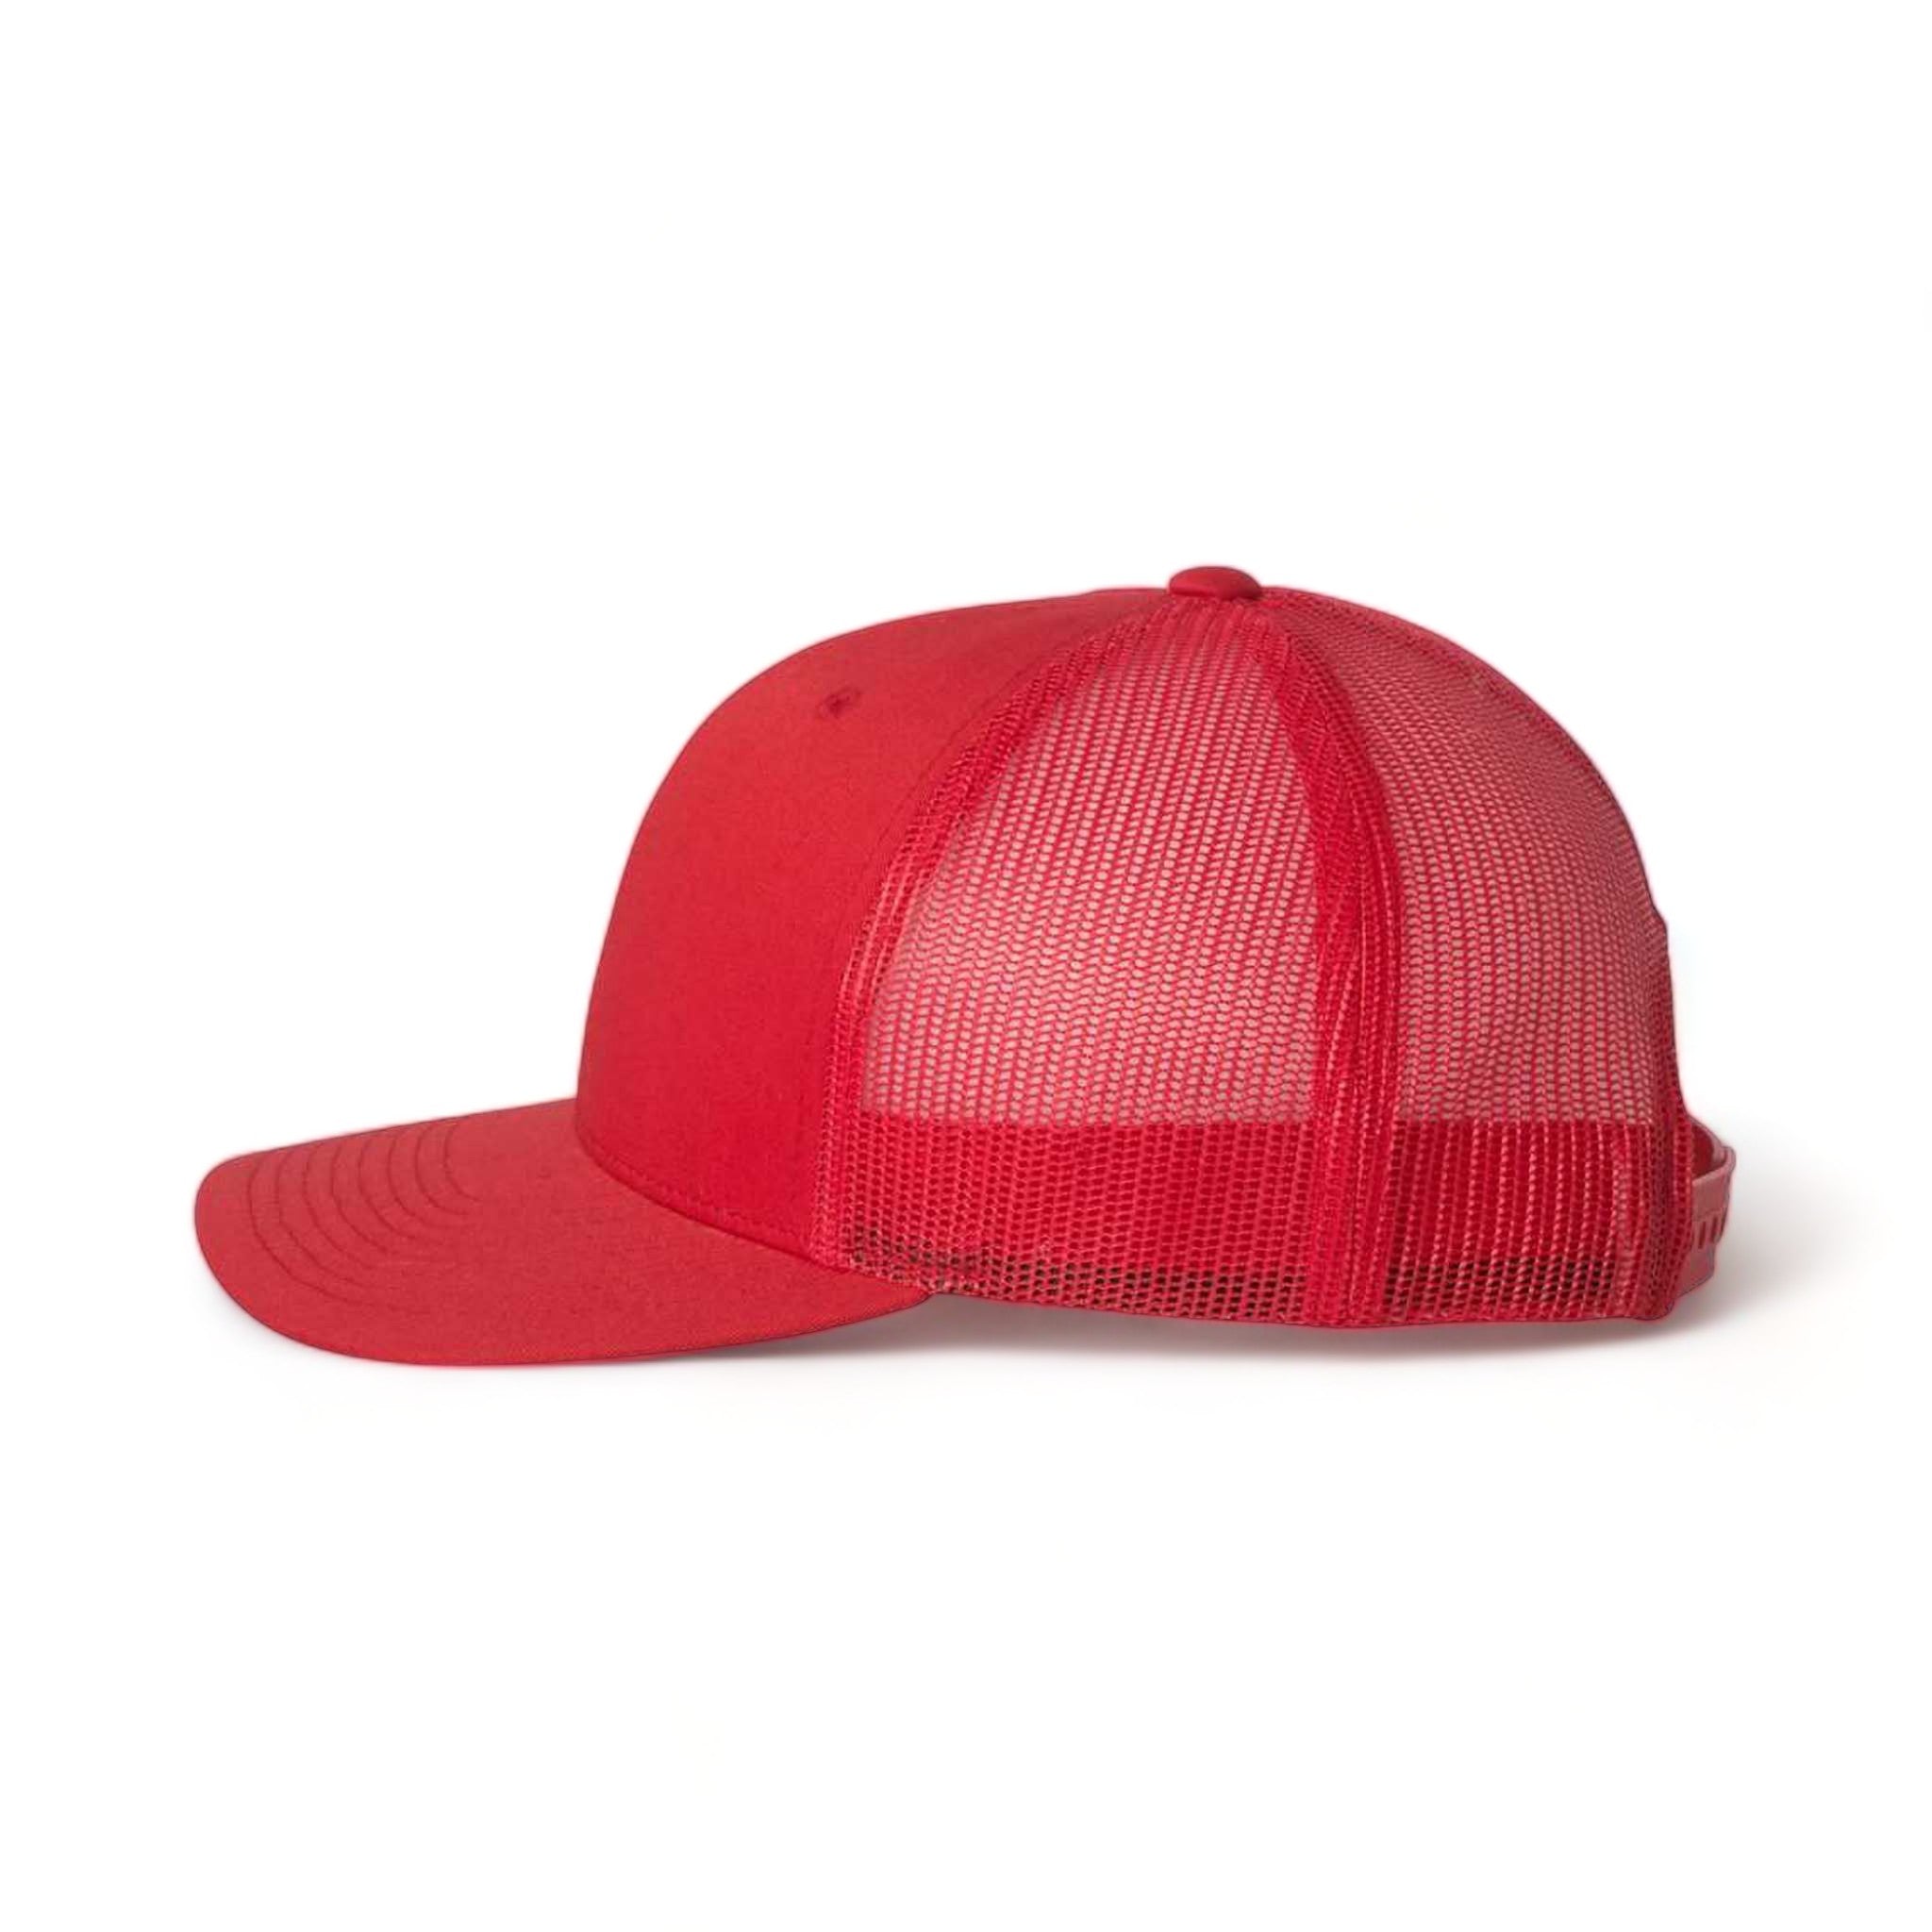 Side view of YP Classics 6606 custom hat in red